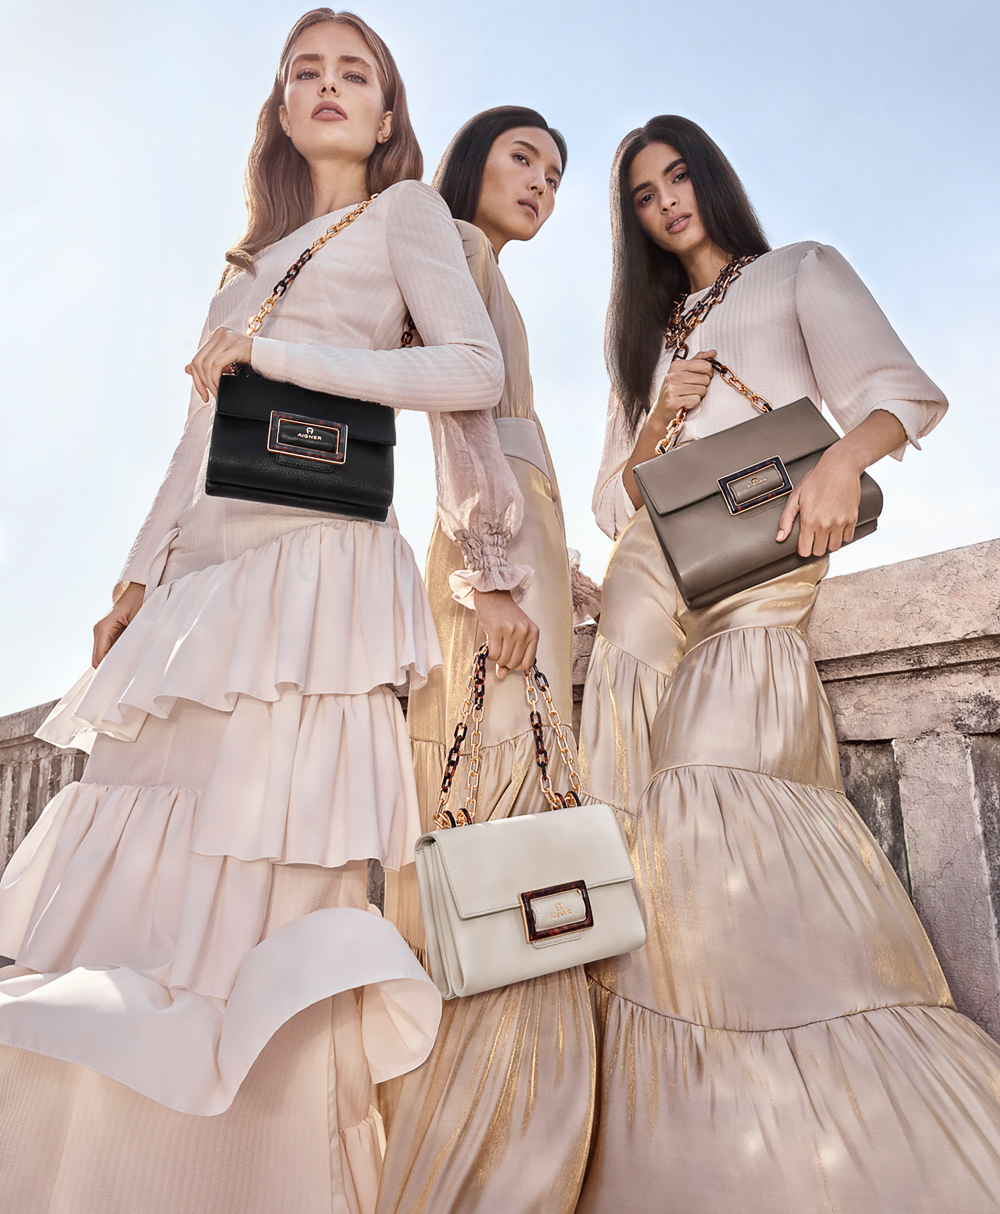 Andreas Ortner for Aigner Spring Summer 2020 Campaign